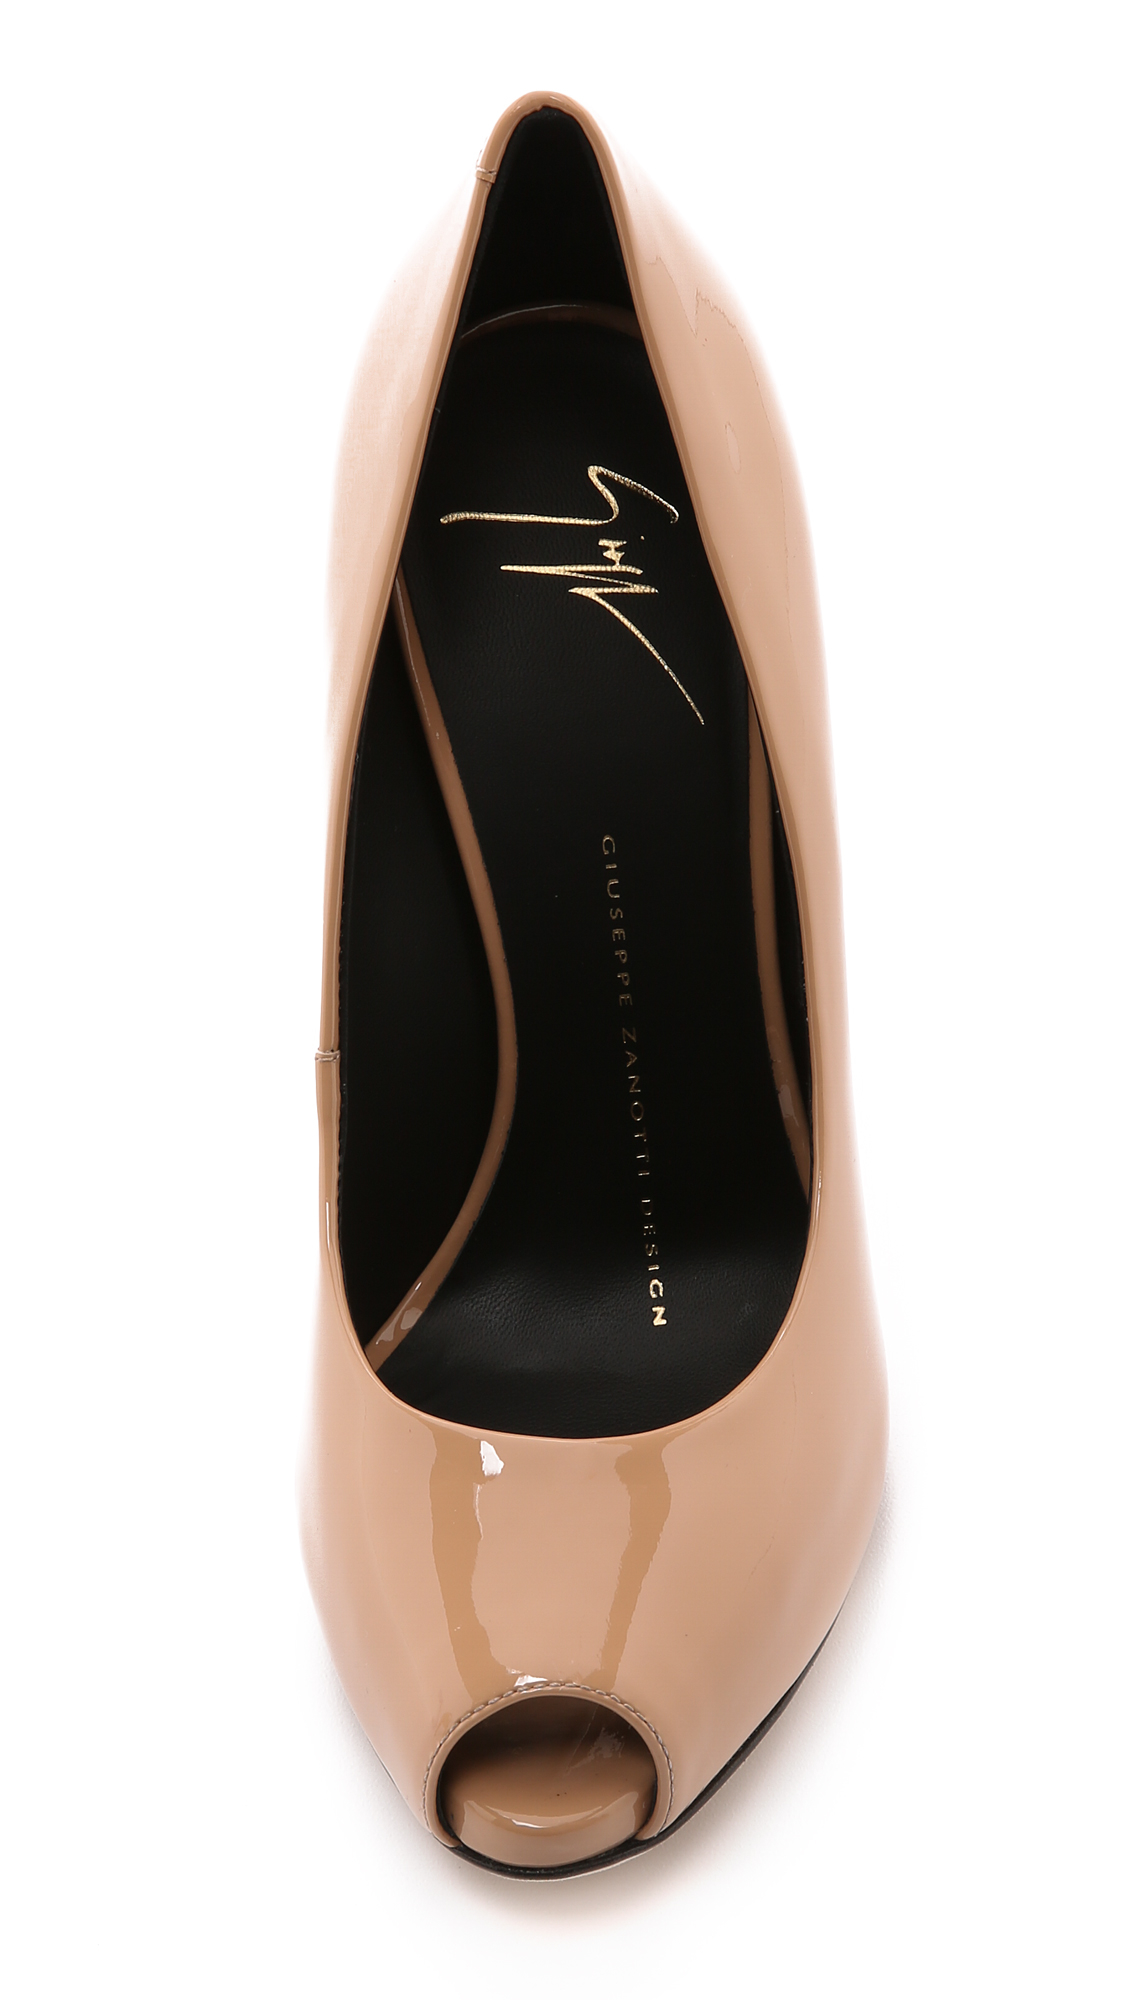 Giuseppe Zanotti Glossy Nude Patent Heels in Natural - Lyst